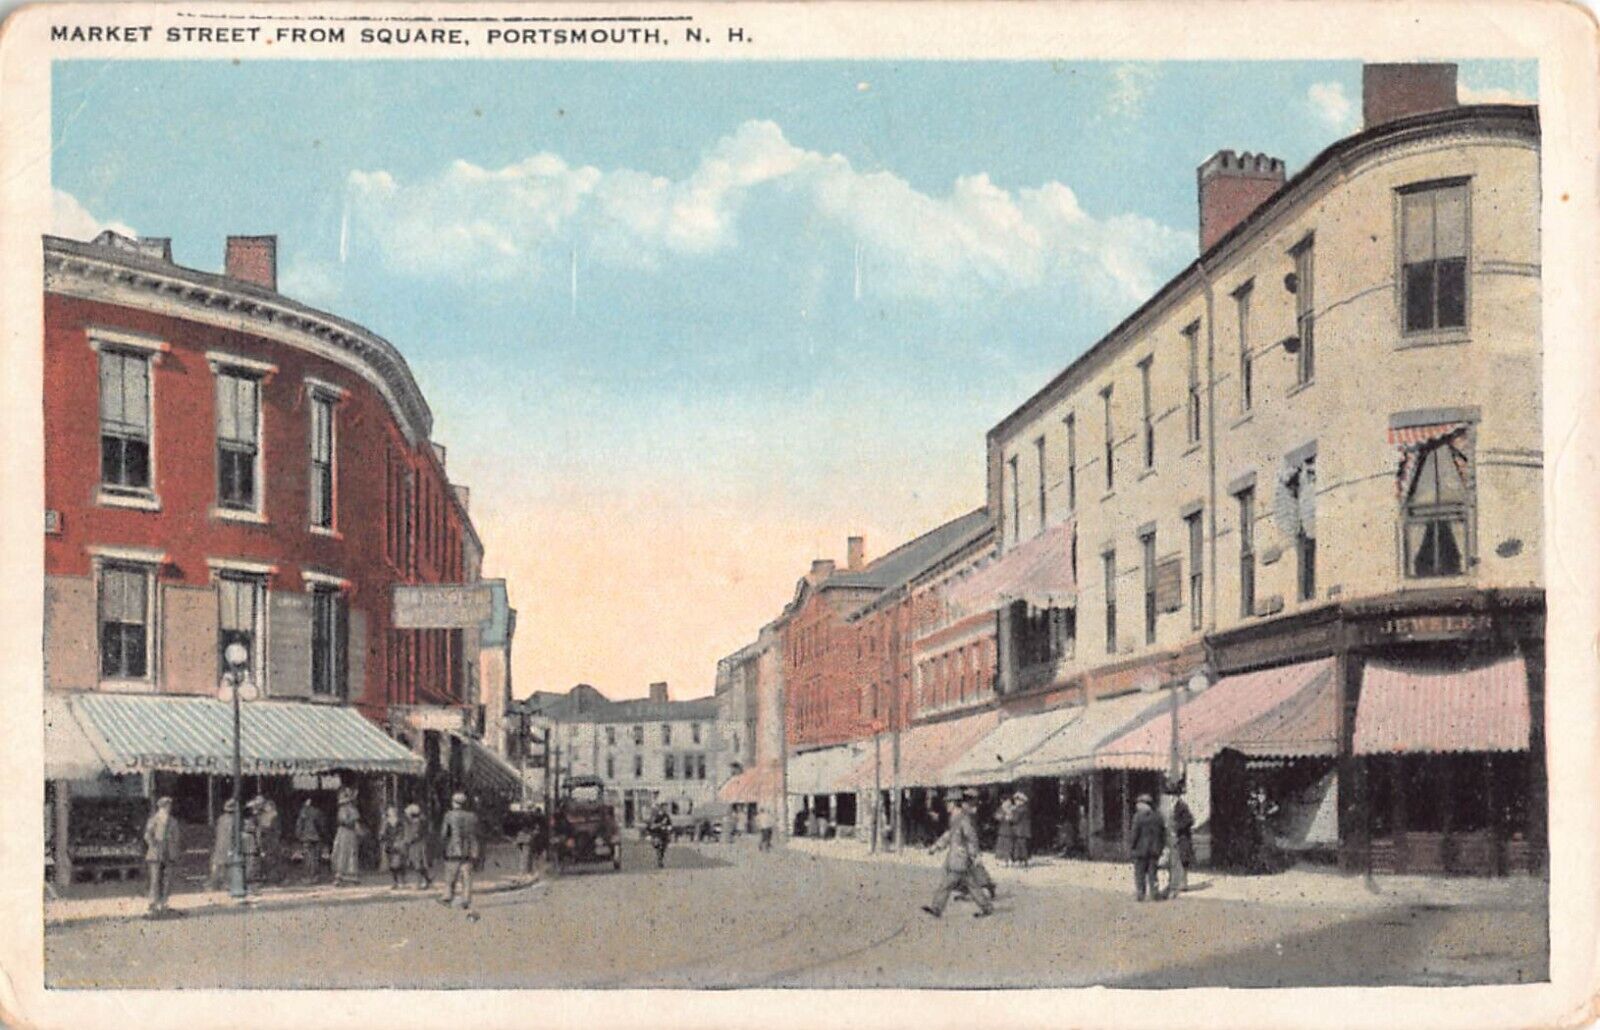 Businesses on Market Street from Square, Portsmouth, New Hampshire-Old Postcard